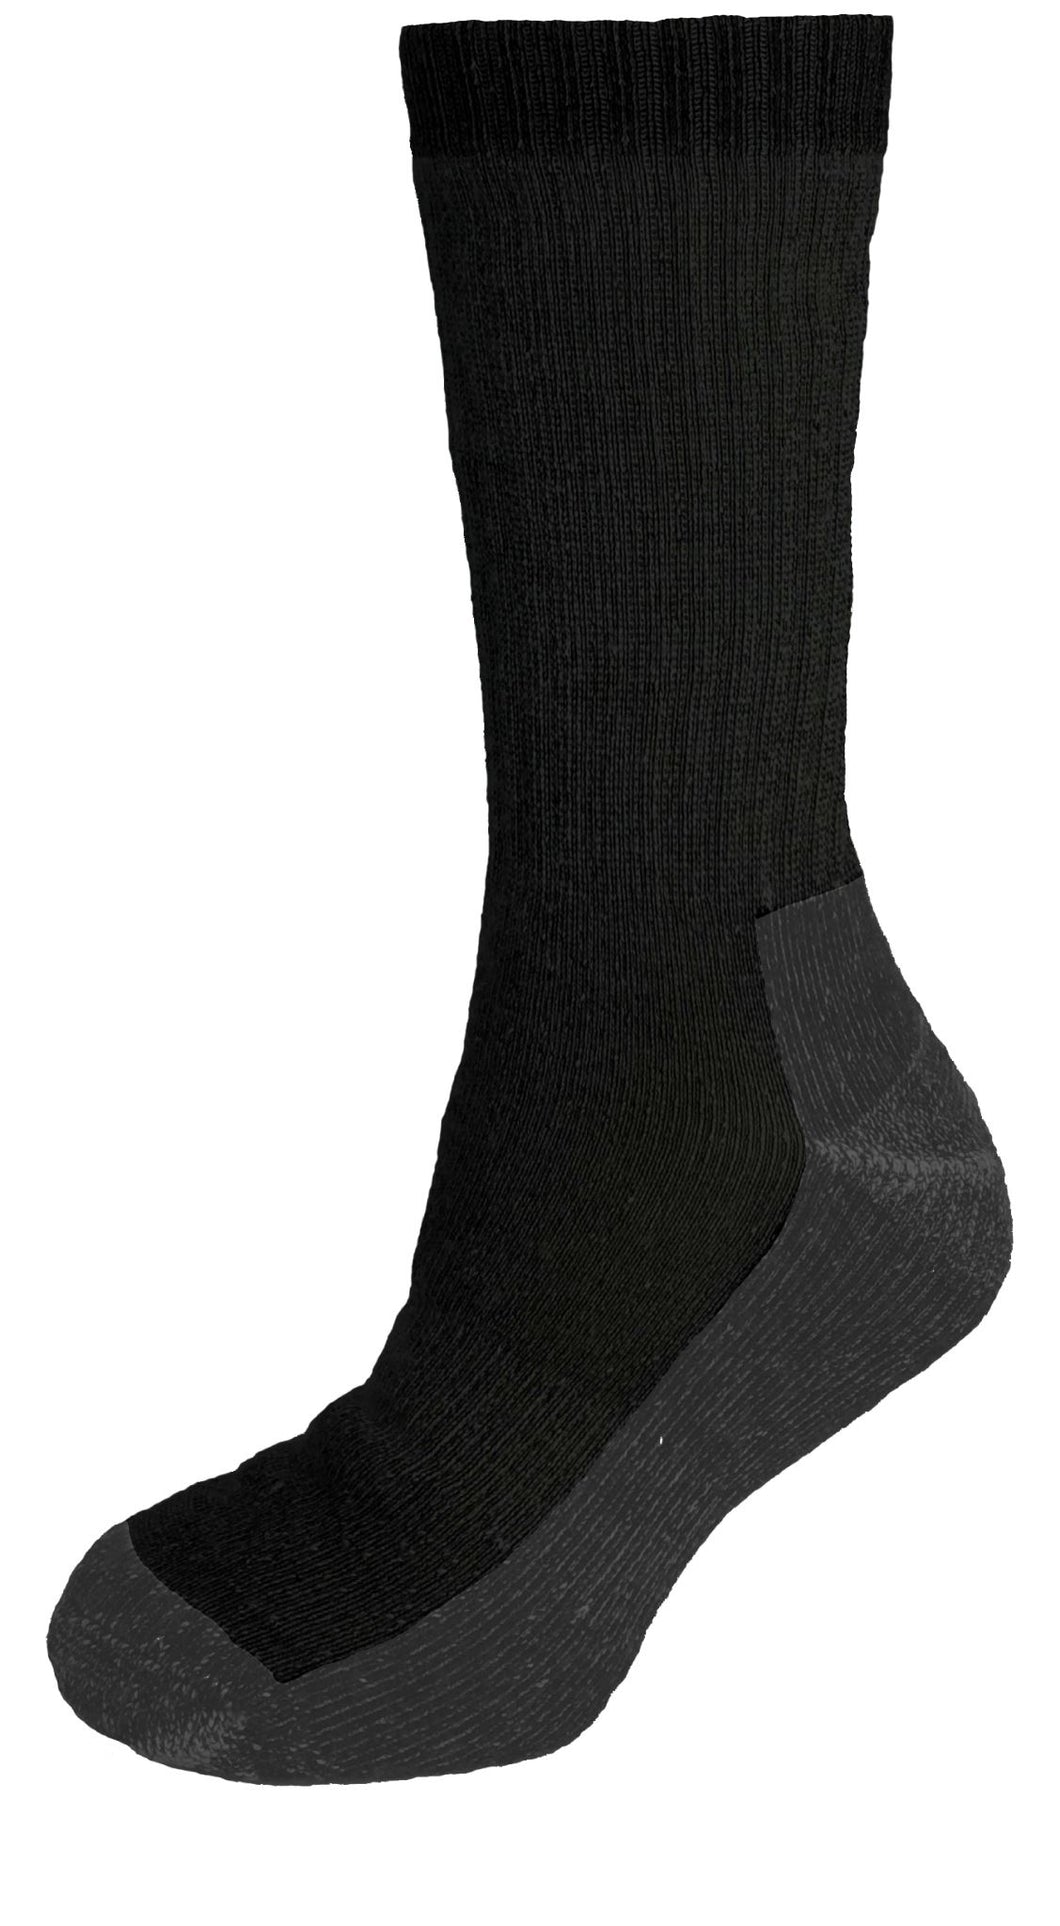 Thermatech 3 Pack Outdoor Crew Socks Black/Grey, Size US 6-10 T38U